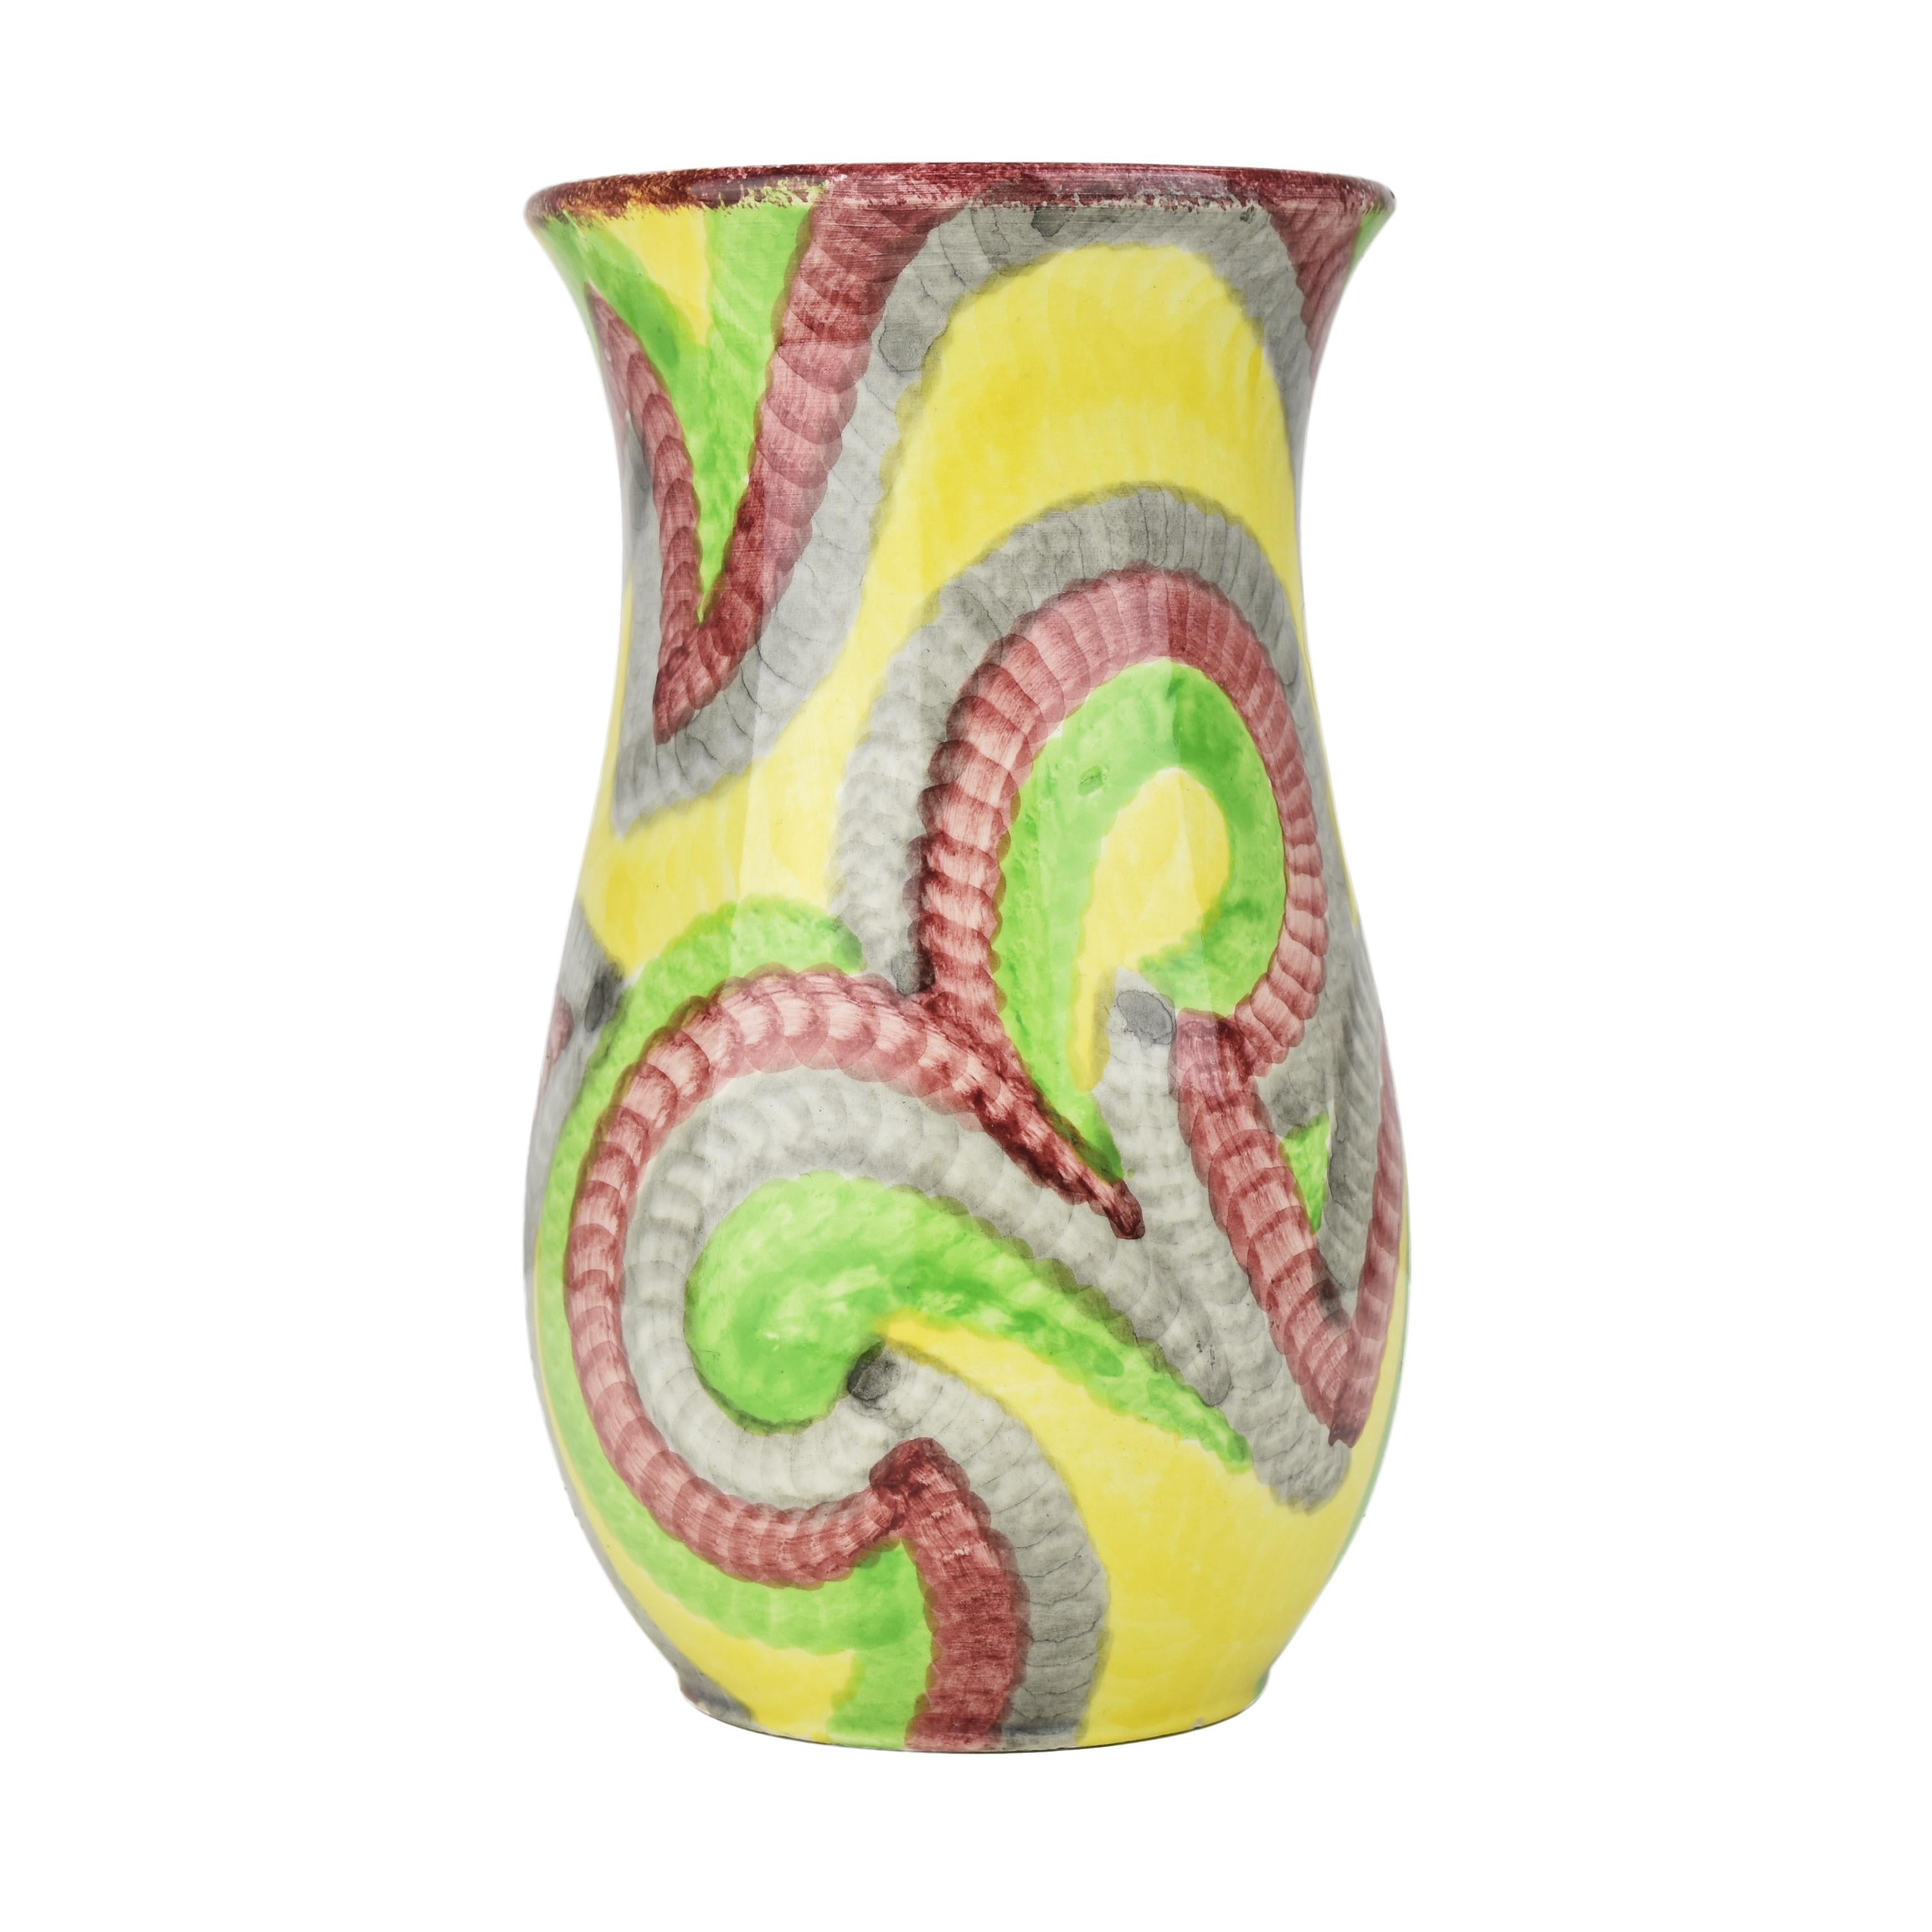 The Schramberg Eva Zeisel Gobelin Art Deco Bauhaus vase is a unique and highly collectible piece of ceramic art. This vase was created in the early 20th century during the Art Deco period, which was characterized by bold geometric shapes, bright